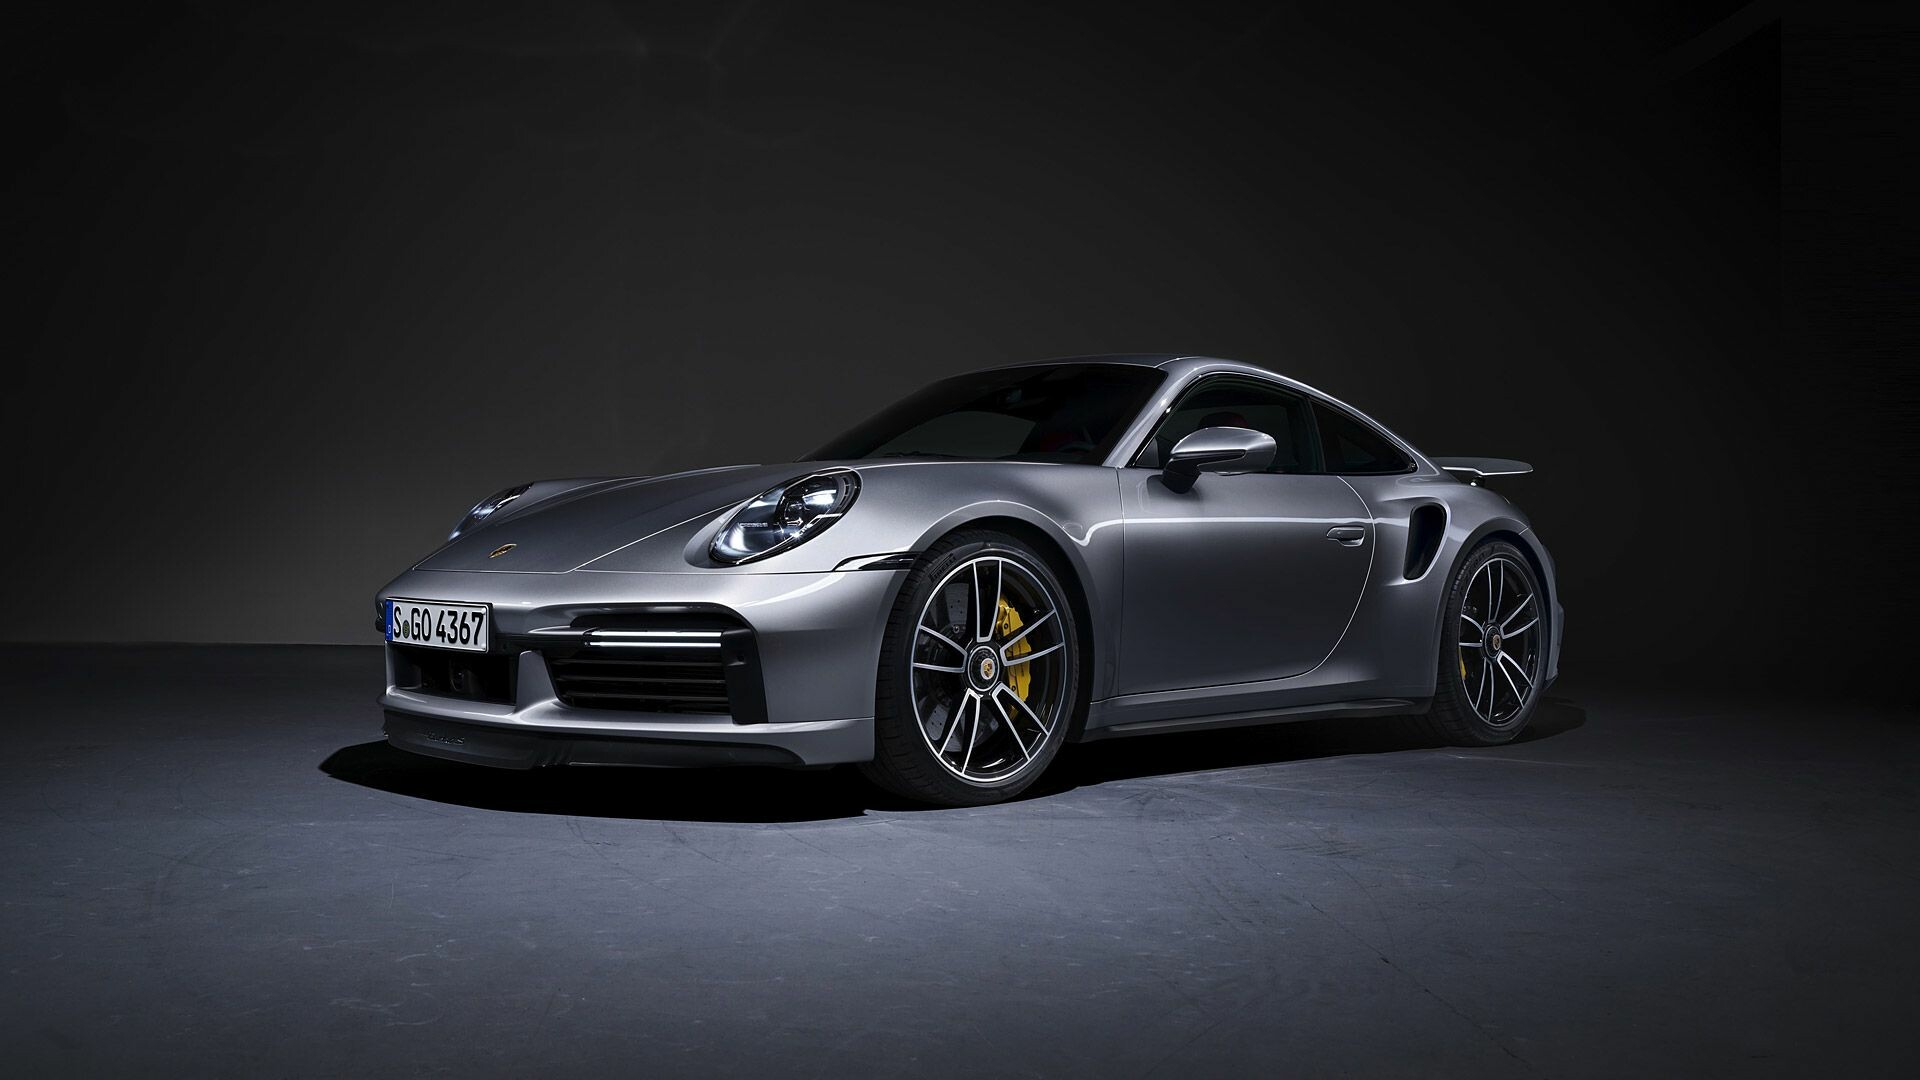 Porsche 911: Turbo S model, The Type 996 GT2 was superseded by the Type 997 GT2 in 2007. 1920x1080 Full HD Wallpaper.